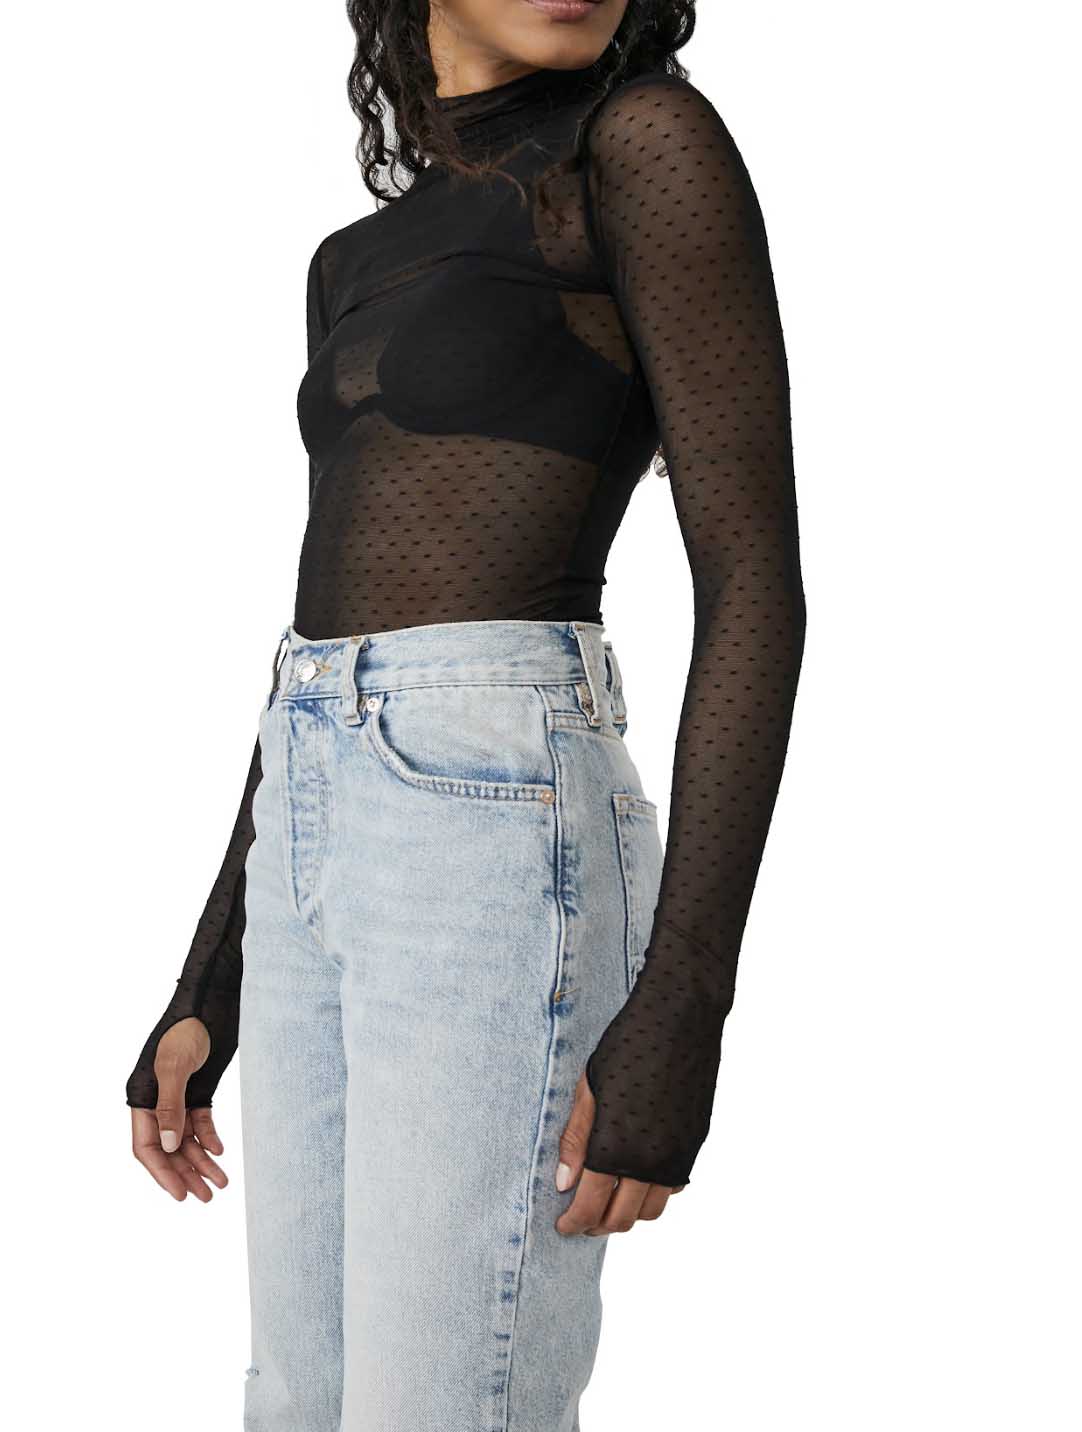 Free People On The Dot Layering Top in Black